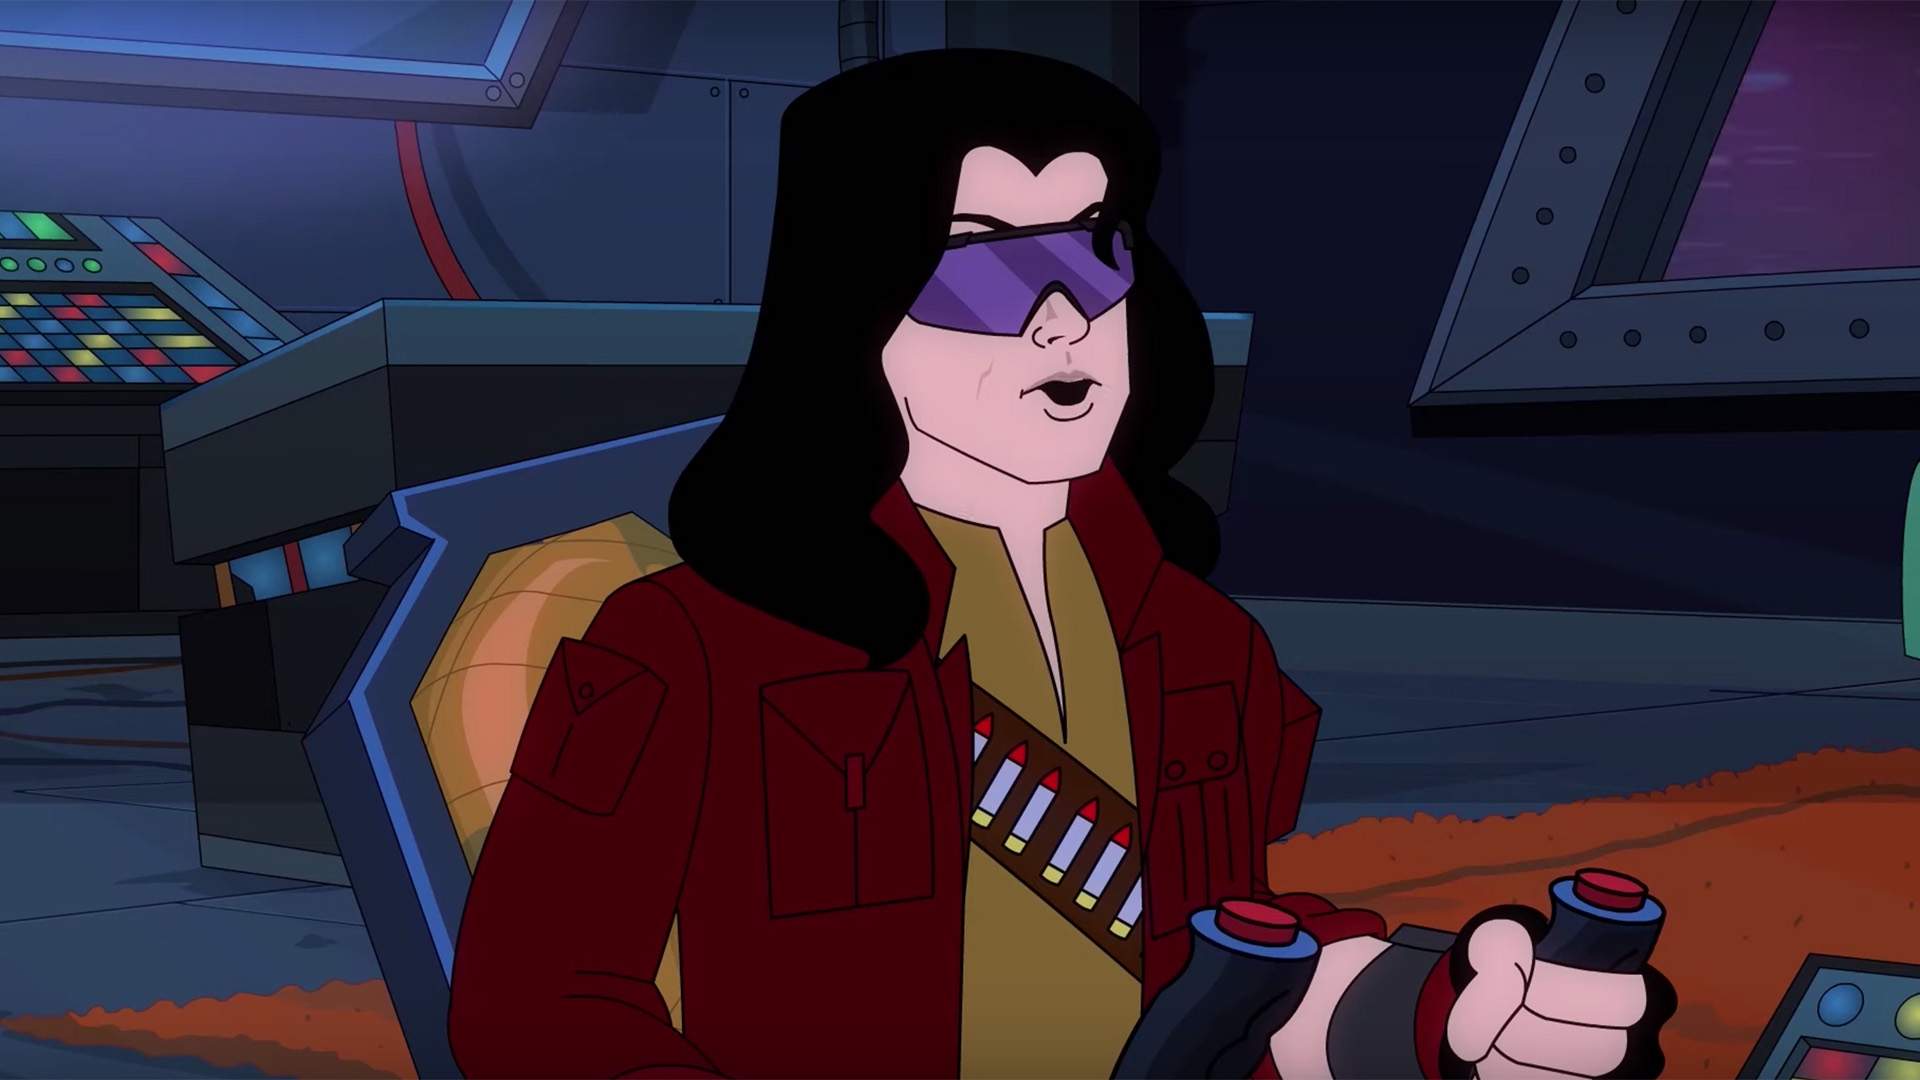 'SpaceWorld' Is the Bizarre Sci-Fi Animation Sending Tommy Wiseau and Greg Sestero Into Space